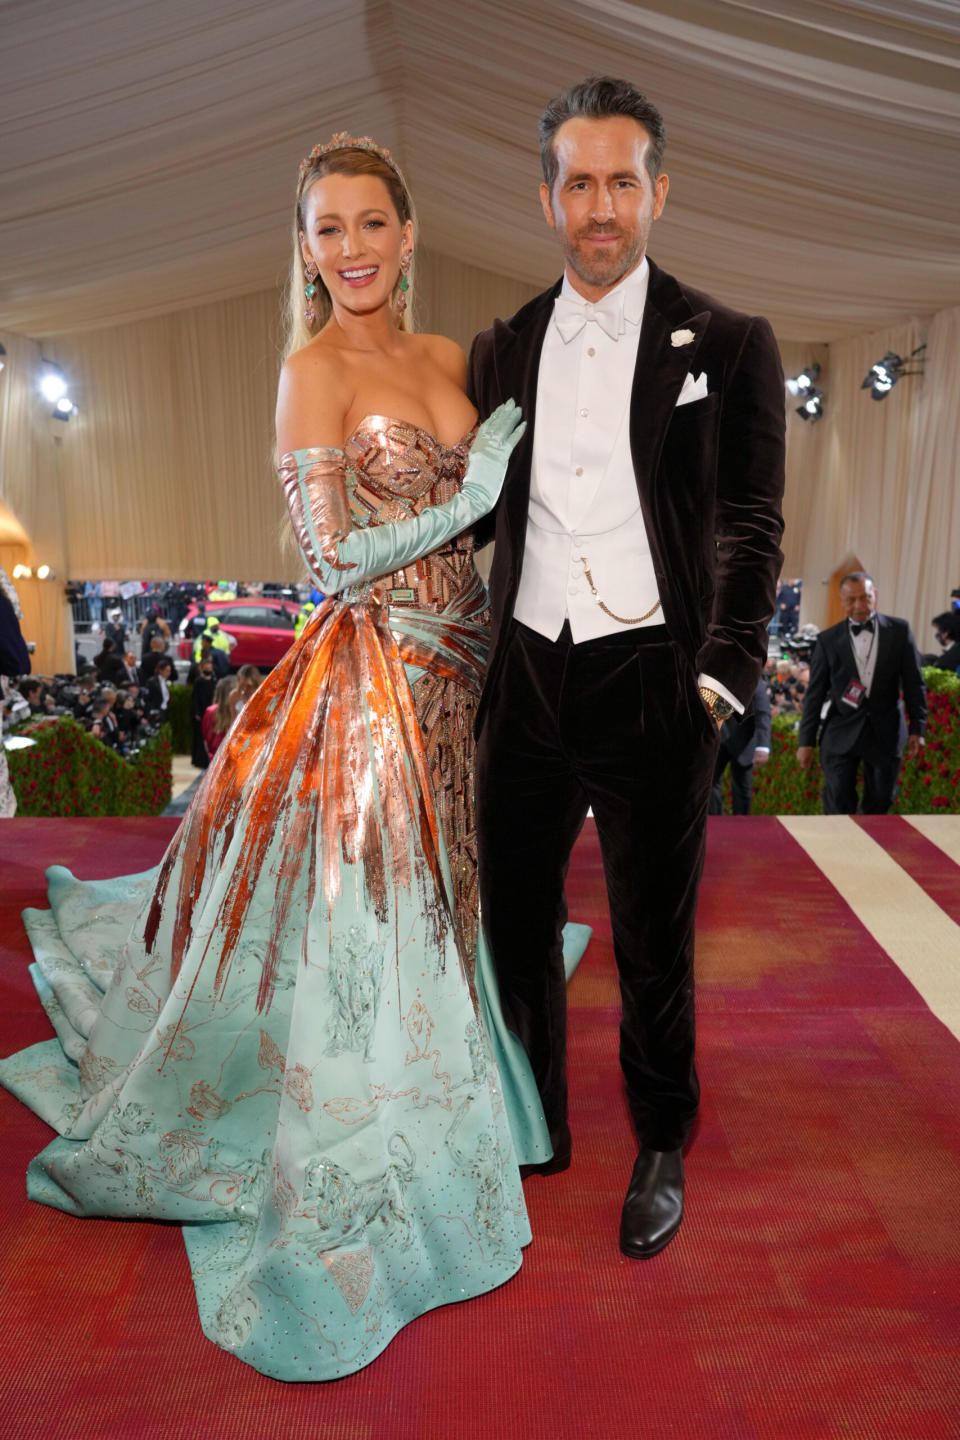 NEW YORK, NEW YORK – MAY 02: (Exclusive Coverage) Blake Lively and Ryan Reynolds arrive at The 2022 Met Gala Celebrating “In America: An Anthology of Fashion” at The Metropolitan Museum of Art on May 02, 2022 in New York City. (Photo by Kevin Mazur/MG22/Getty Images for The Met Museum/Vogue )